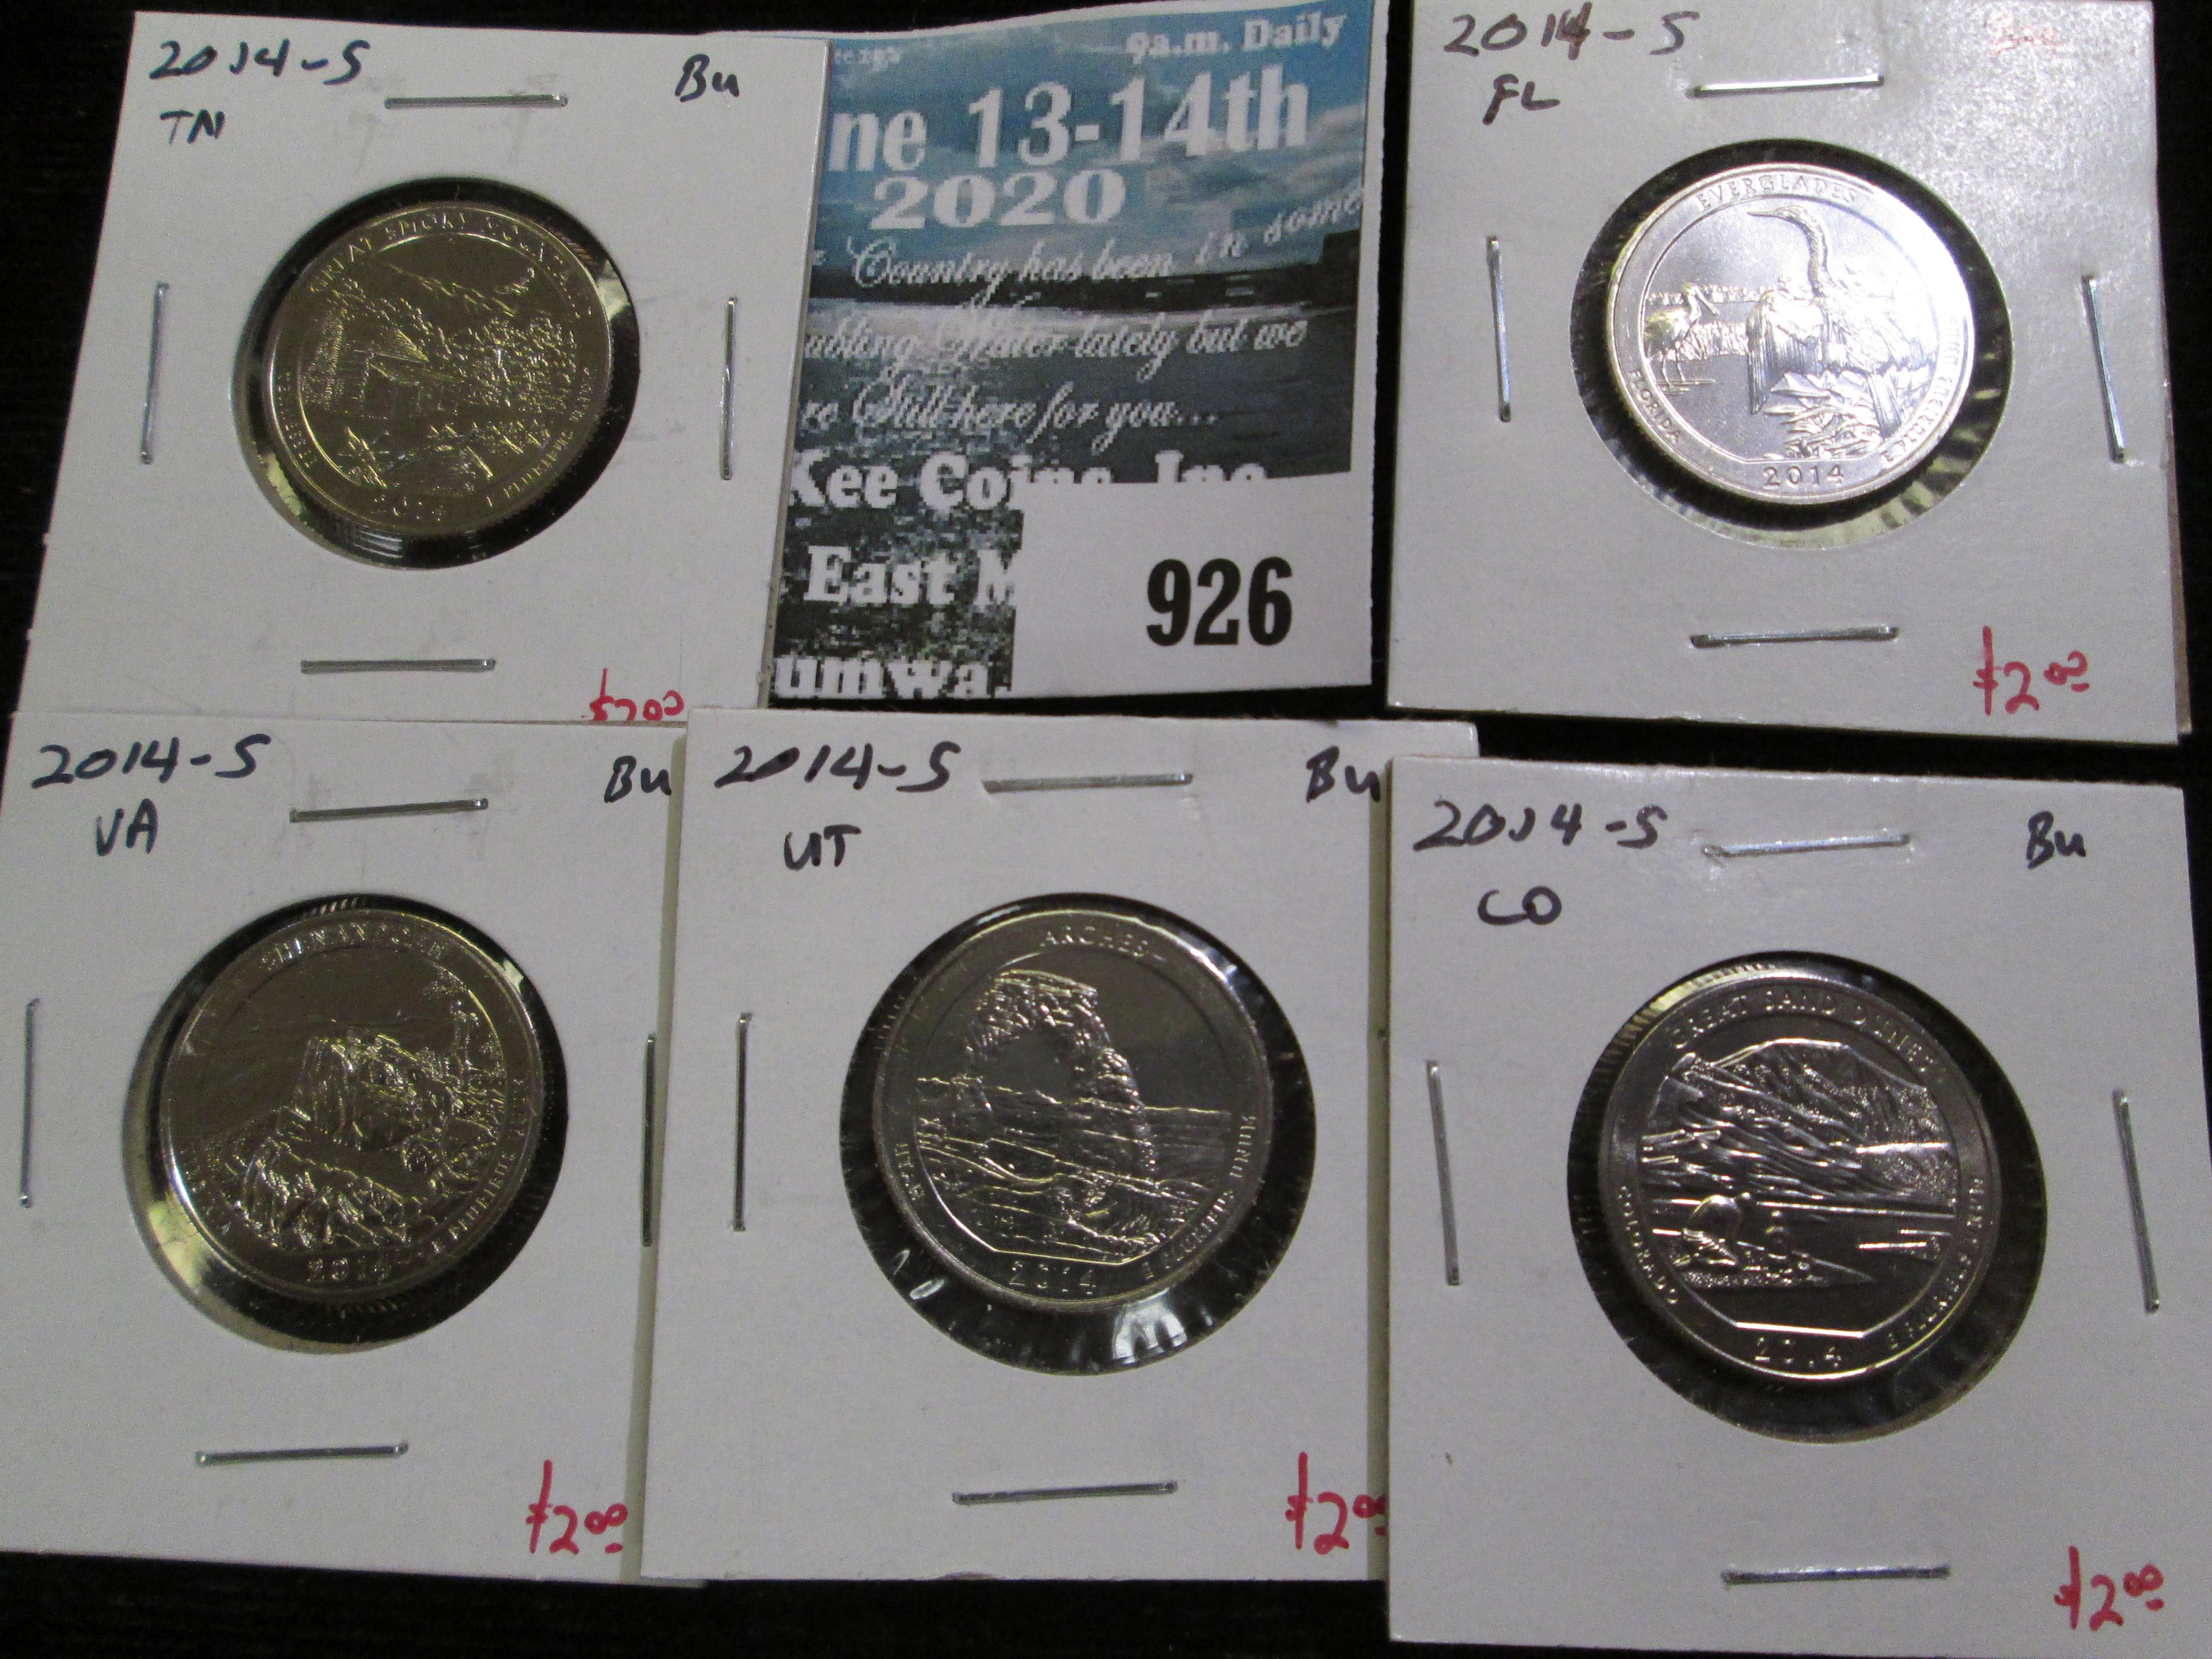 Set of 5 2014-S BU (non-Proof issues, low mintage), TN, VA, UT, CO & FL, group value $10+